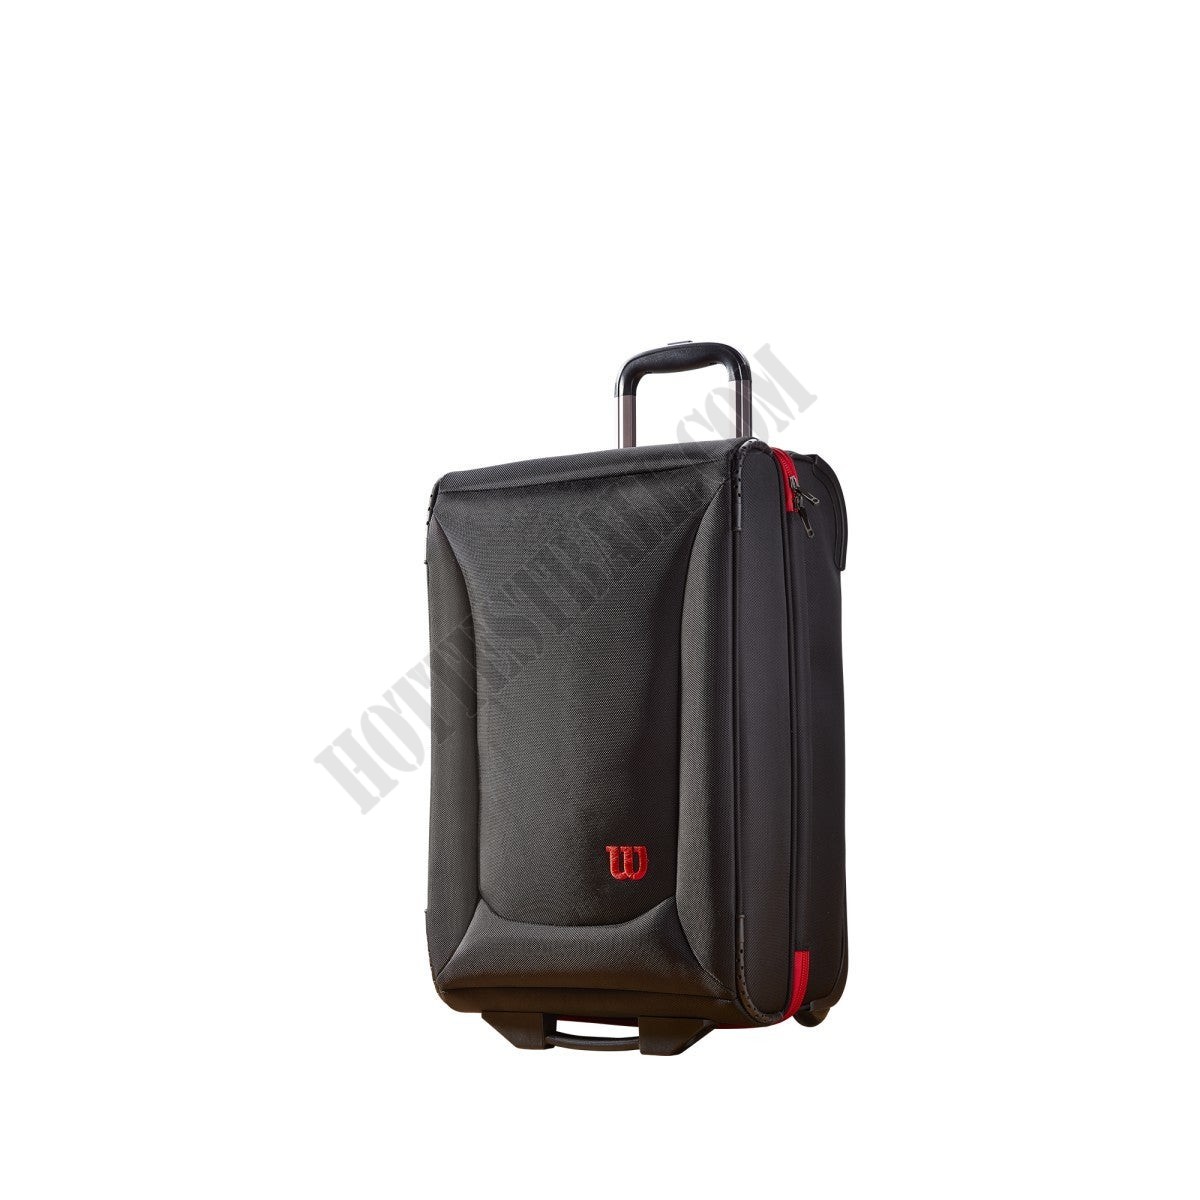 Domestic Carry-on SmBag - Wilson Discount Store - -0